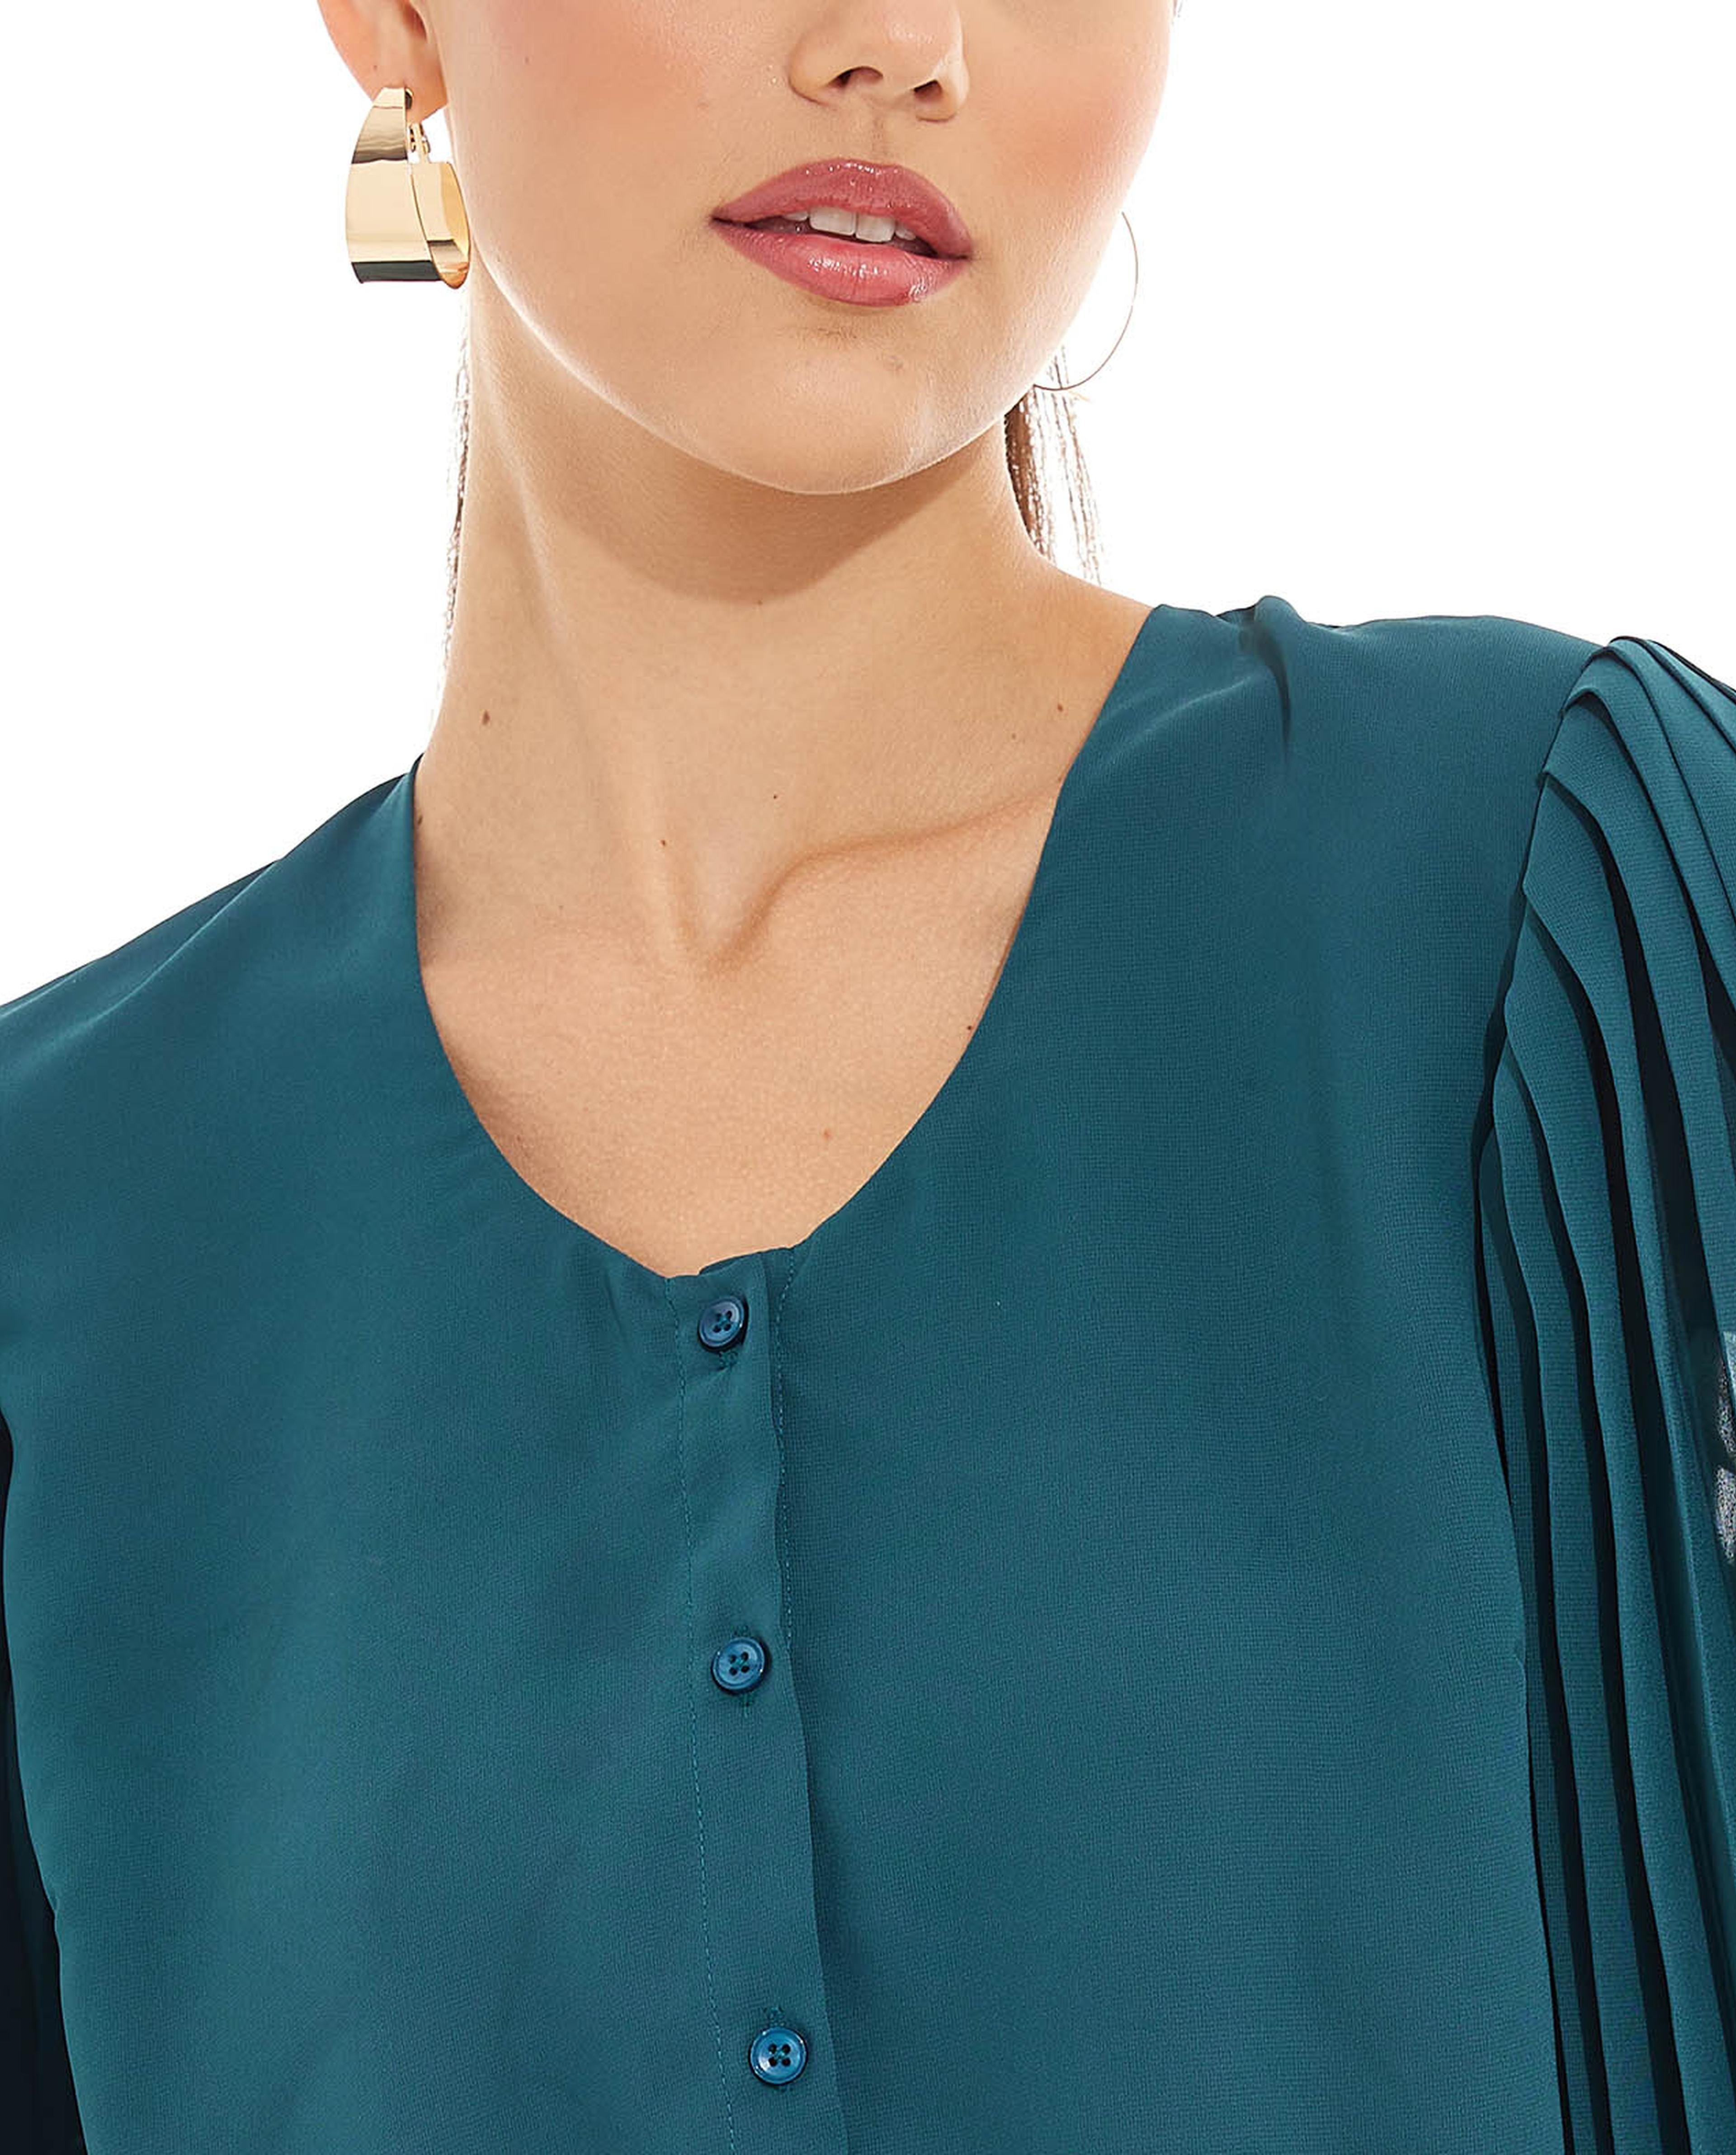 Solid Top with Bell Sleeves and Tie-Up Waist